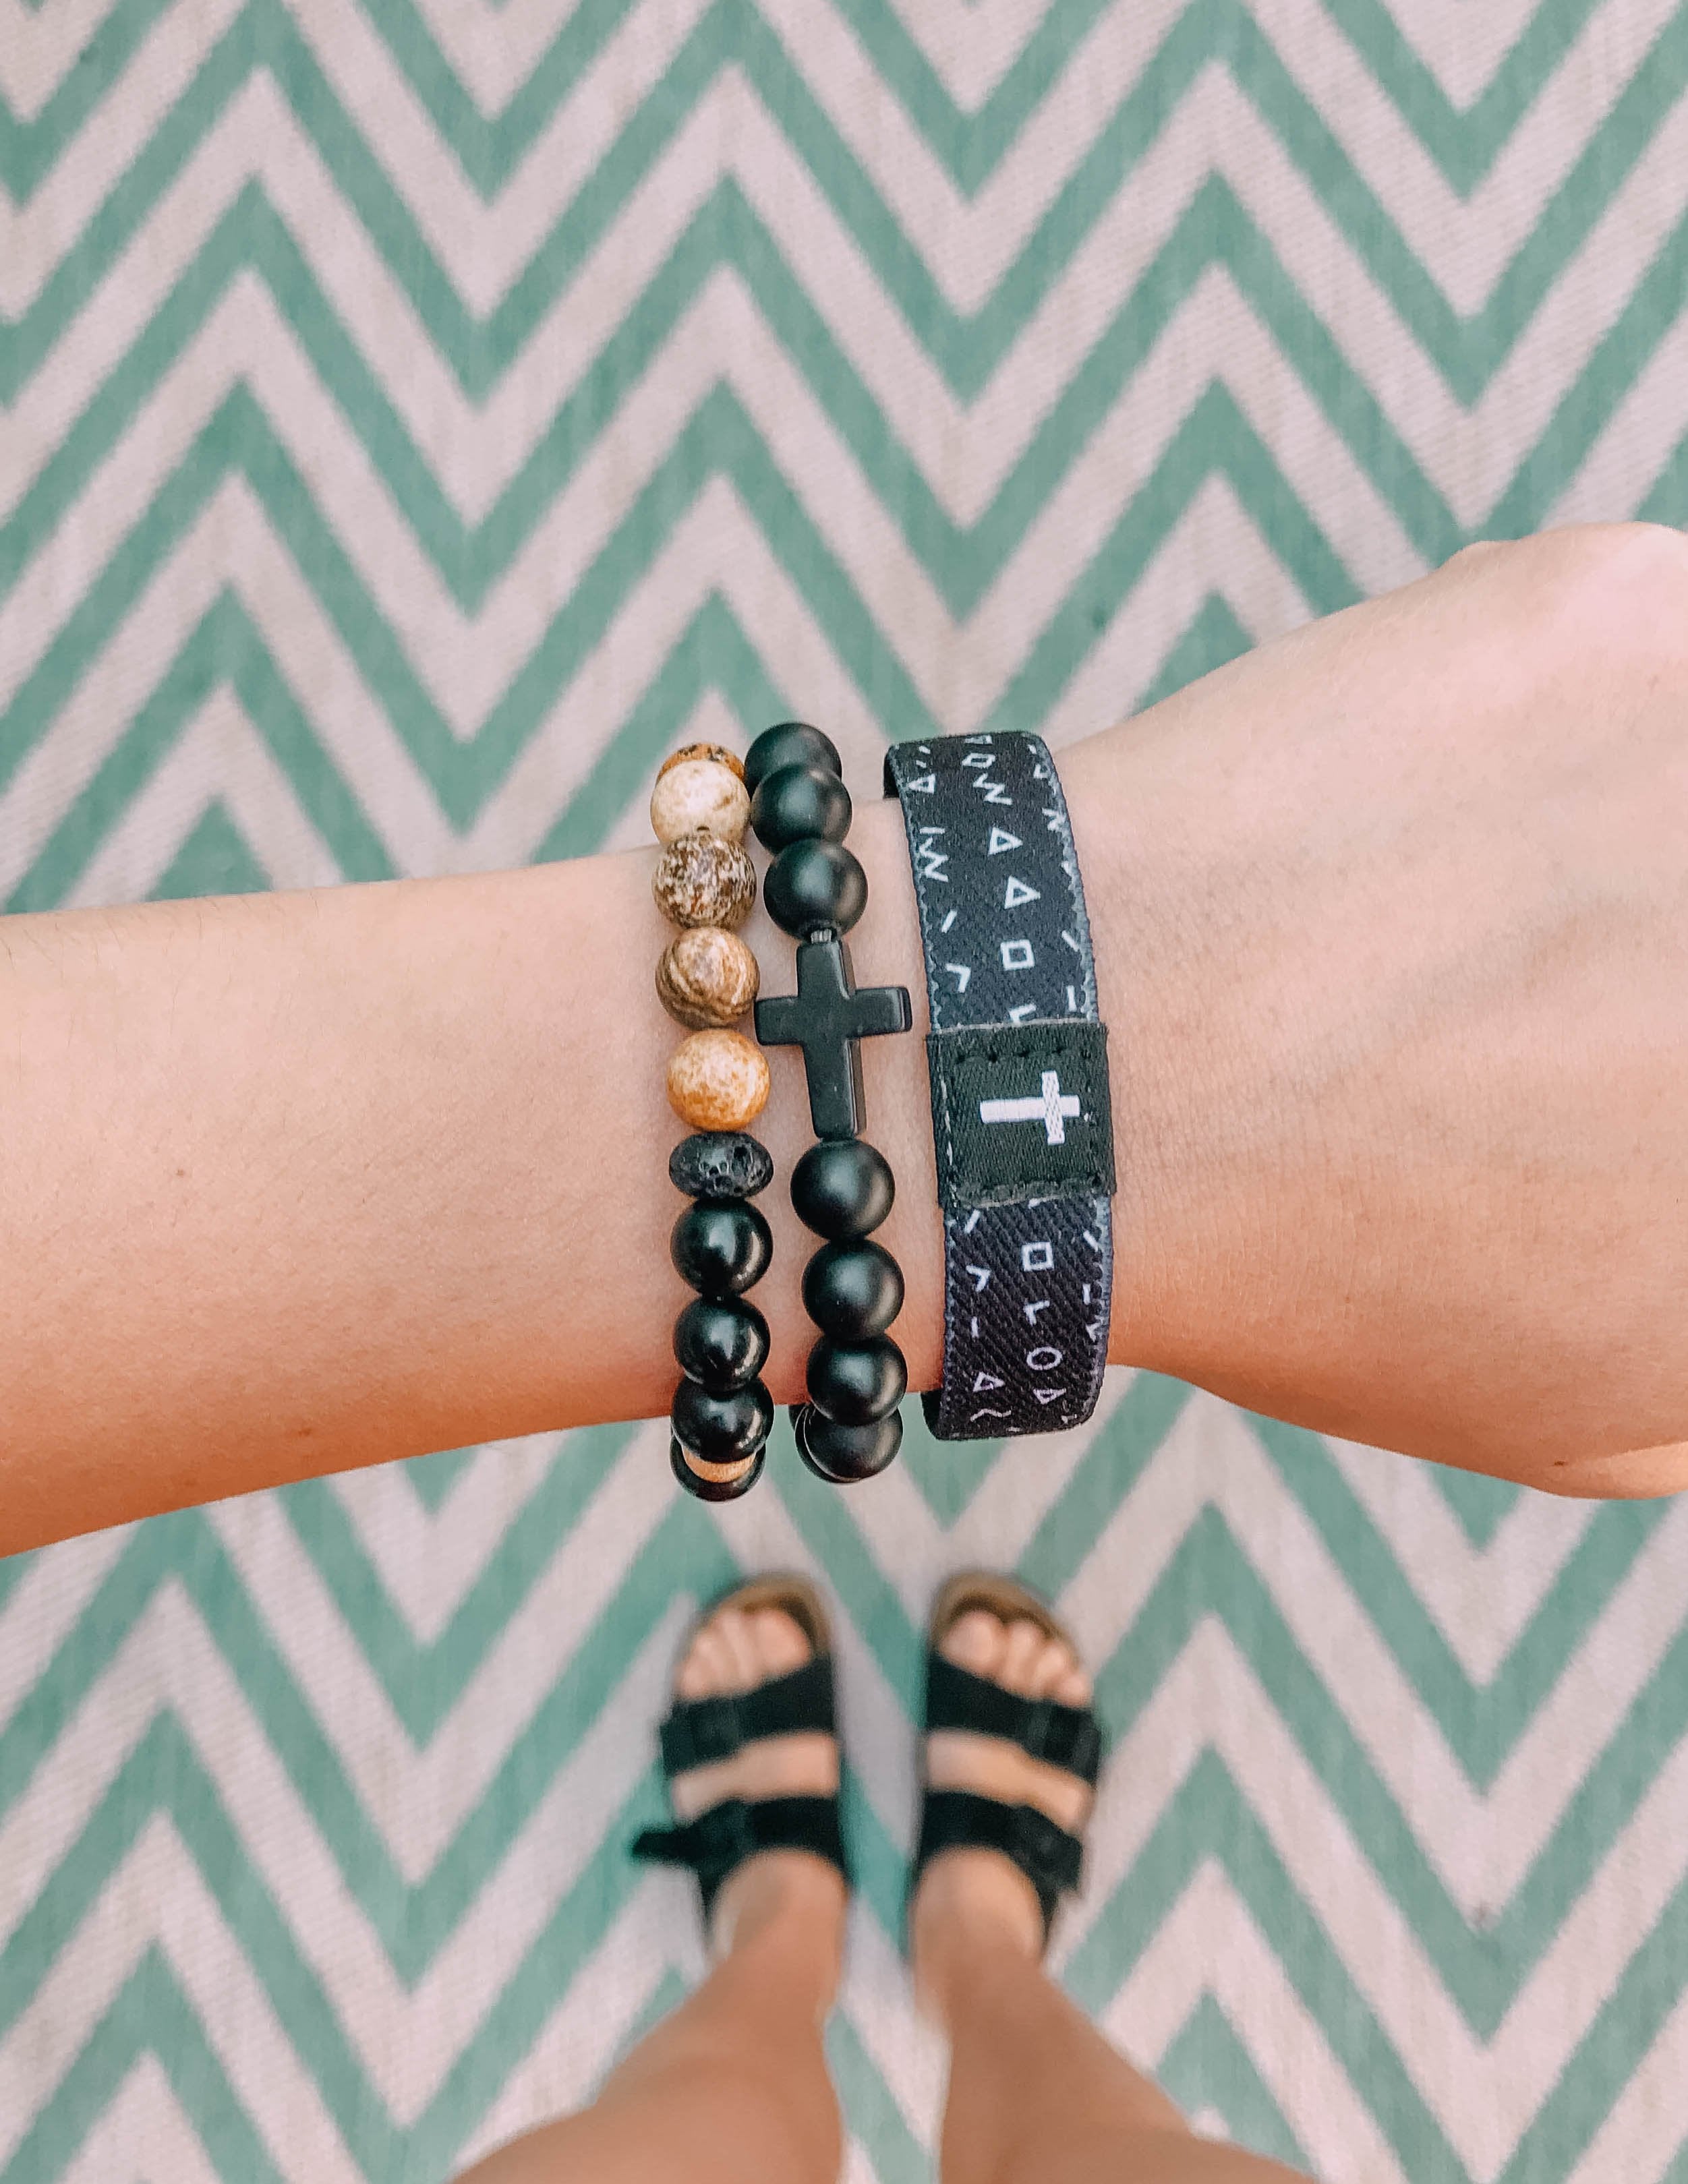 Elevated Faith - Love our WWJD bracelets? They are on sale now! ✨ Shop the  WWJD pack here ➝ https://elevatedfaith.com/products/wwjd-bracelet-pack |  Facebook